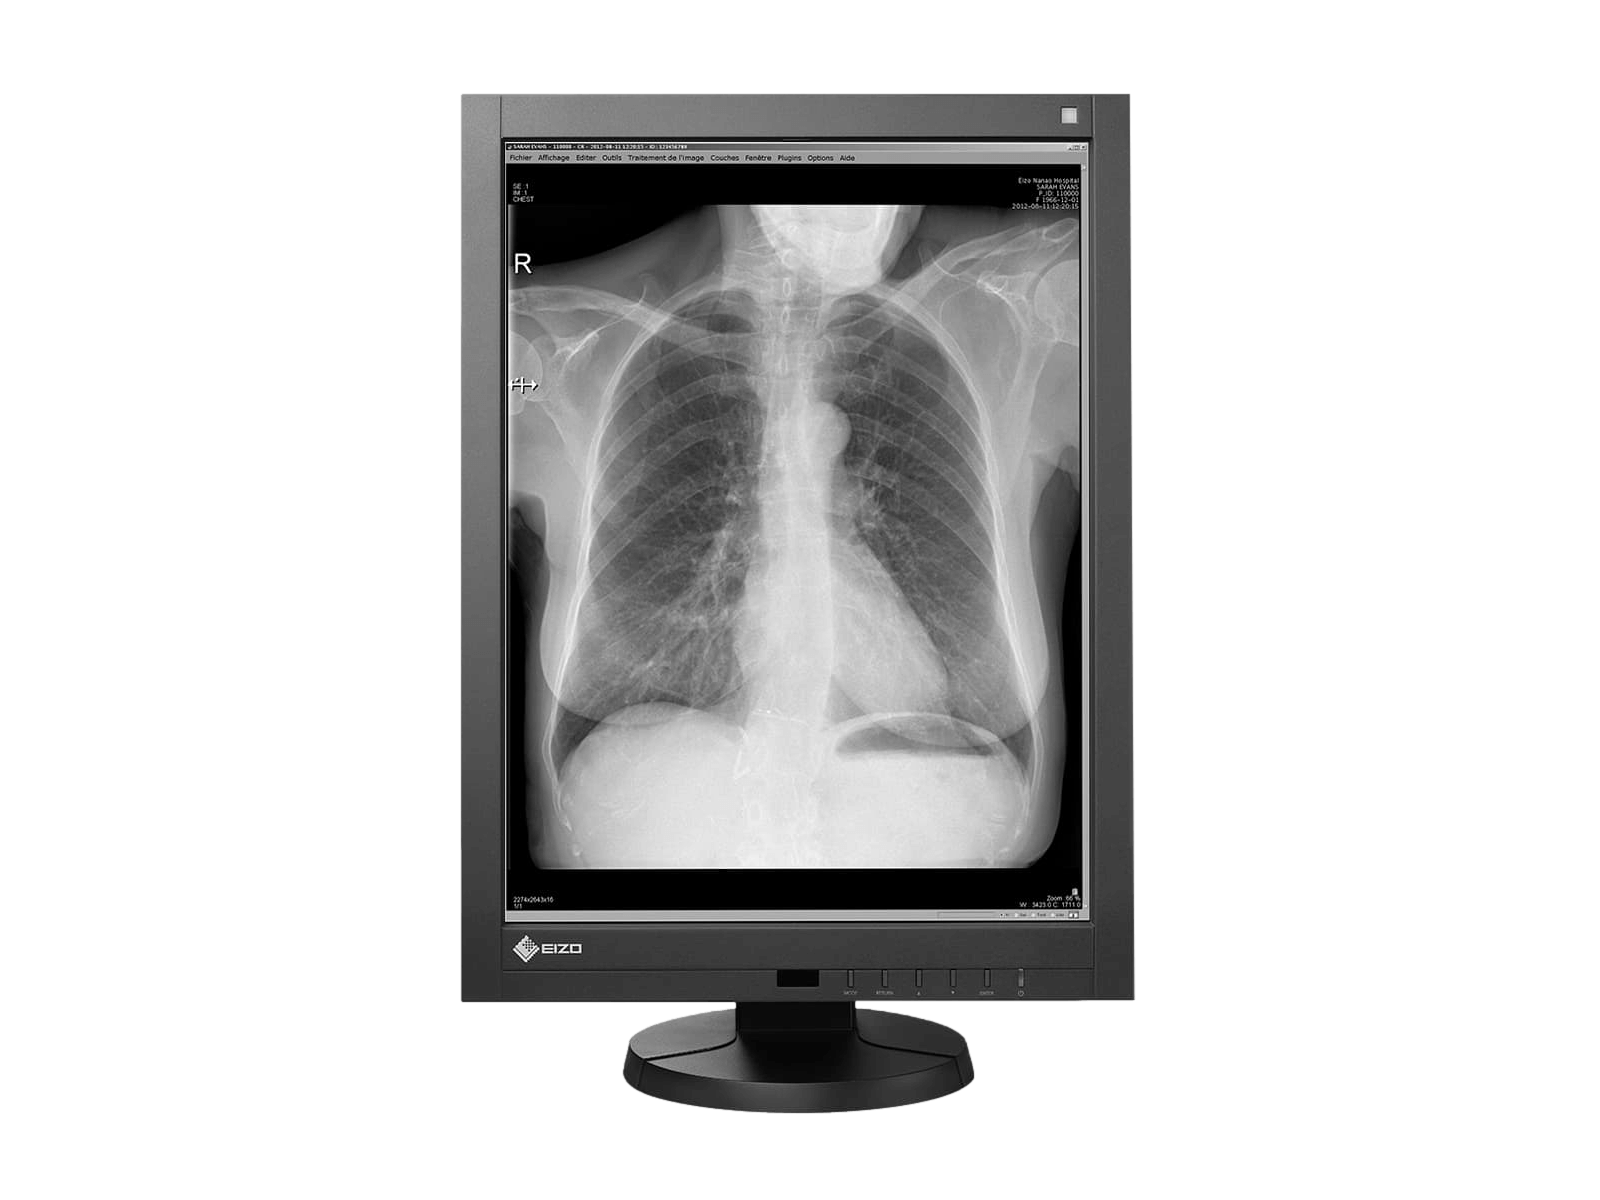 Medical monitor RadiForce GX340 3MP 21.3" LCD LED Monochrome Display is ideal for CR with its 3MP high resolution, displaying an entire chest image with great accuracy 